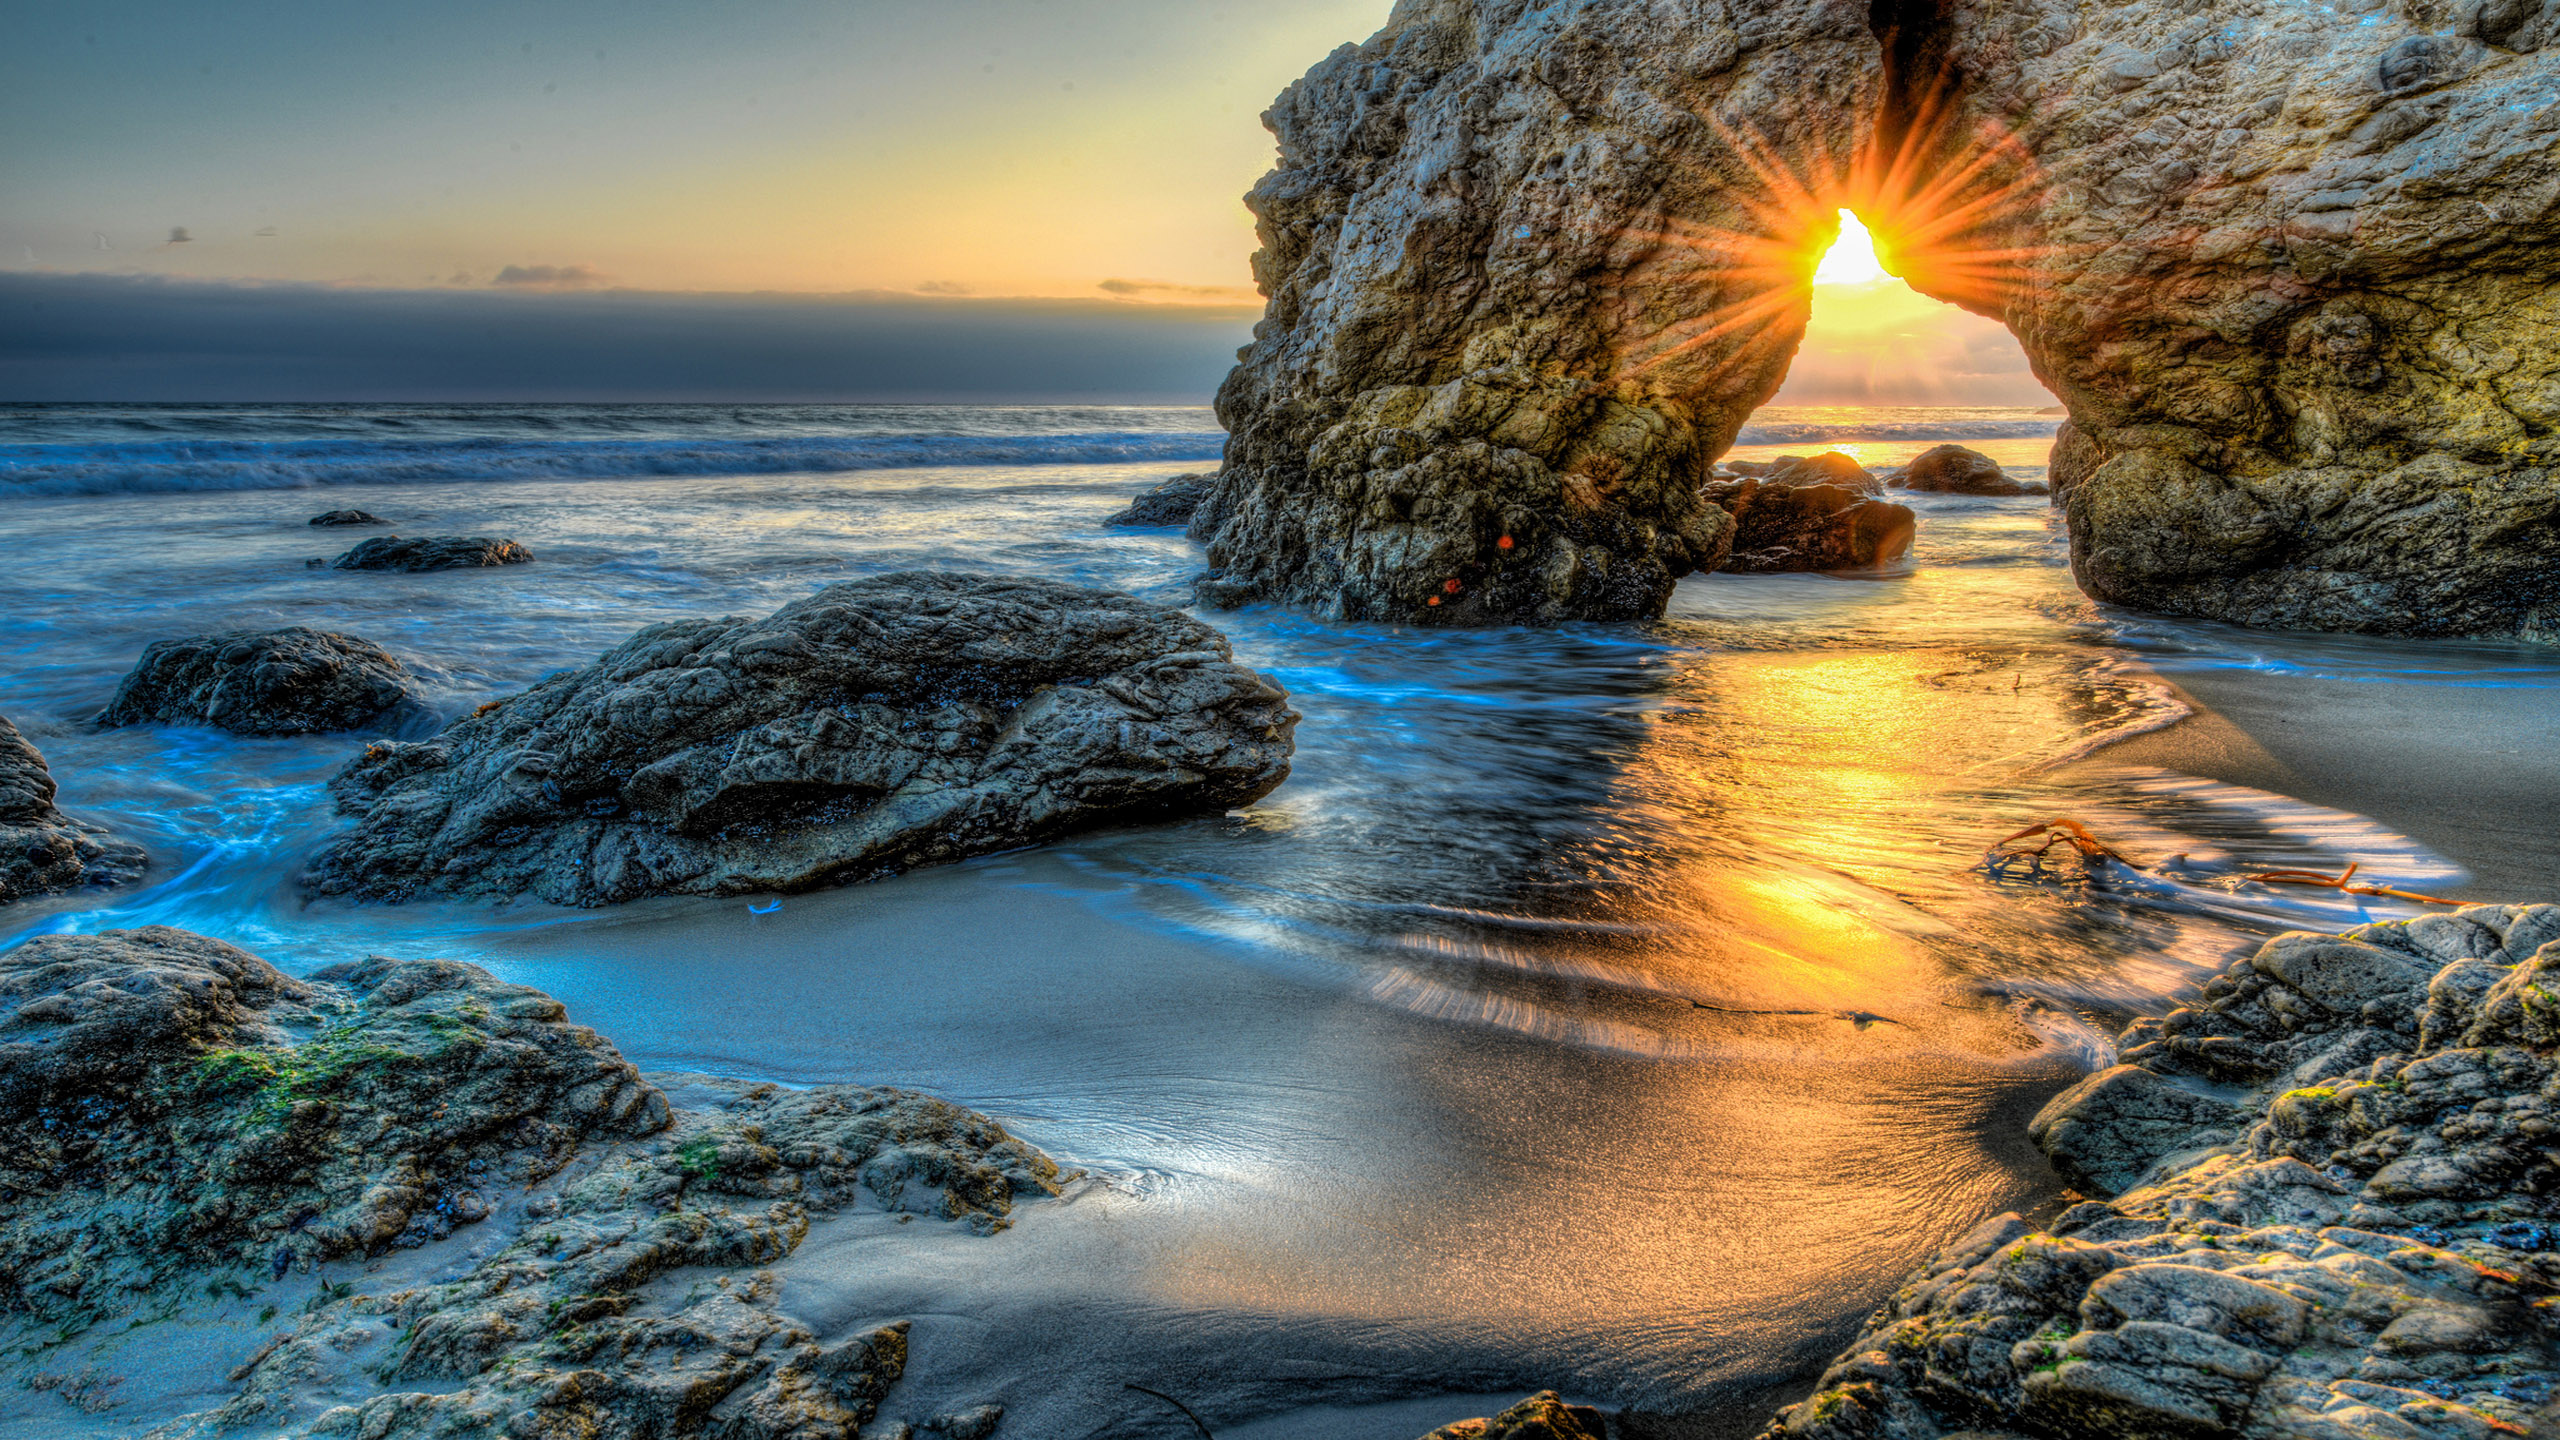 Sea Rock Sunset Wallpapers Hd 8364 : Wallpapers13